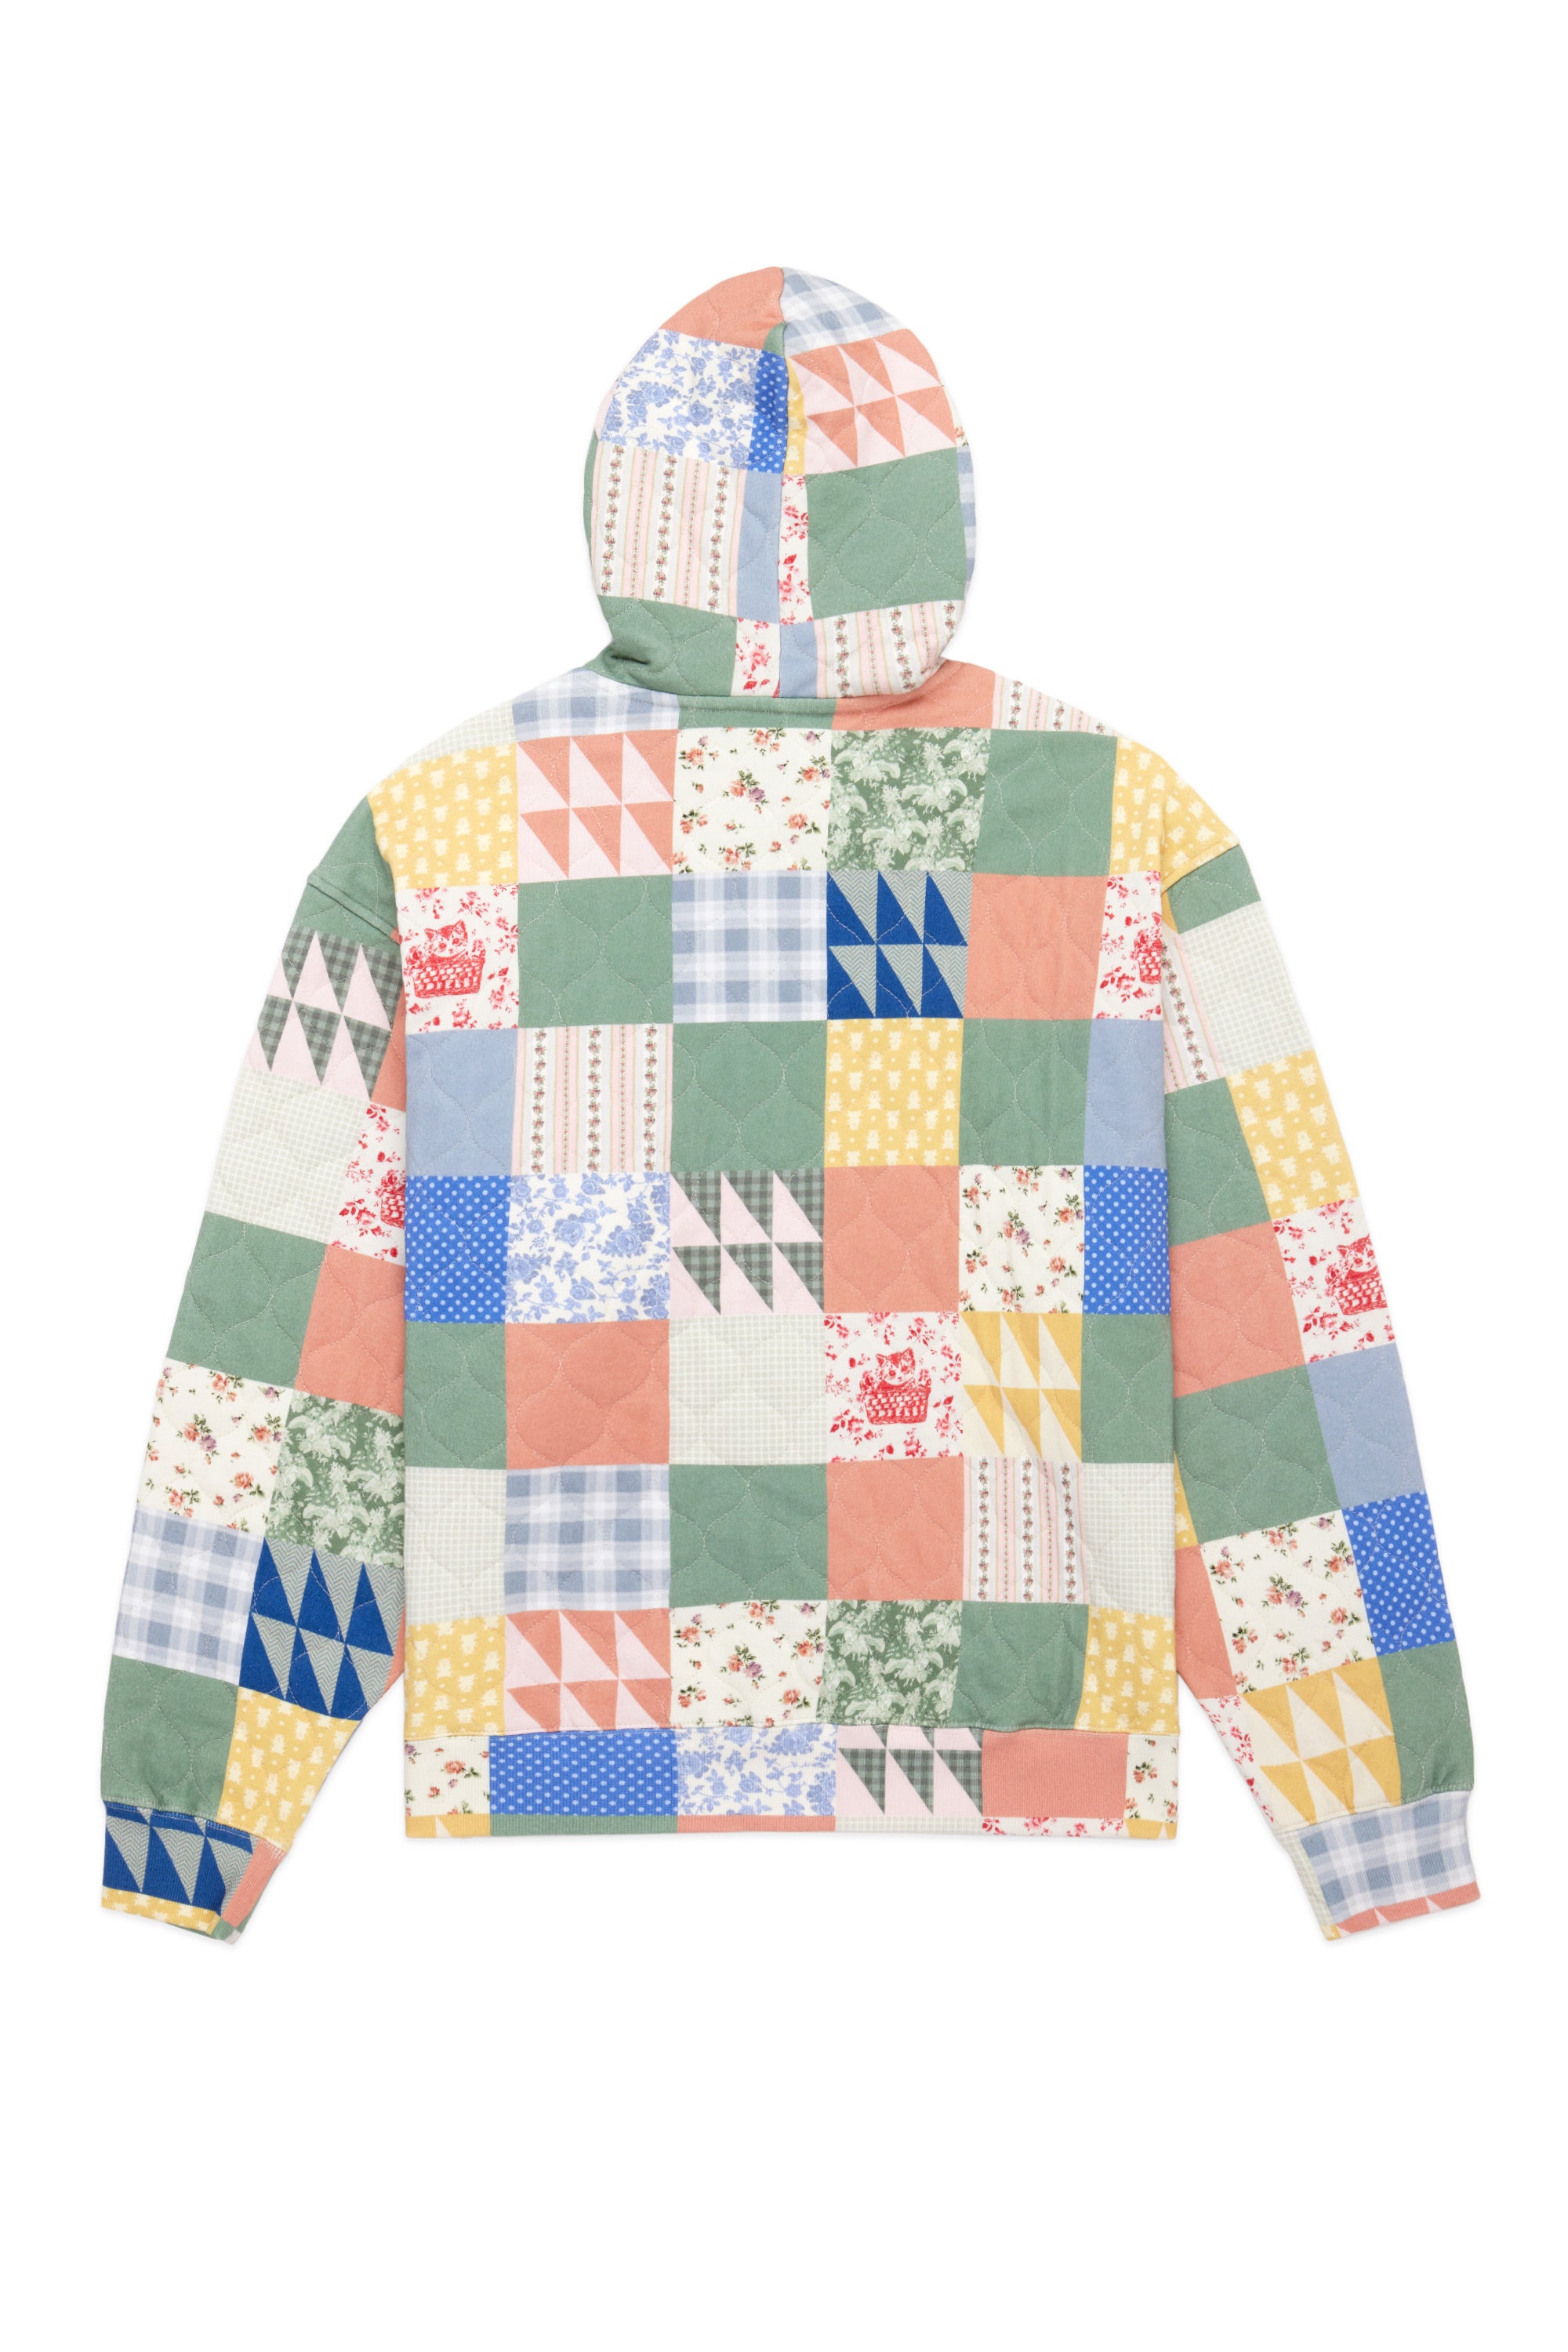 Teddy Fresh - All over print quilt sets shown in one of